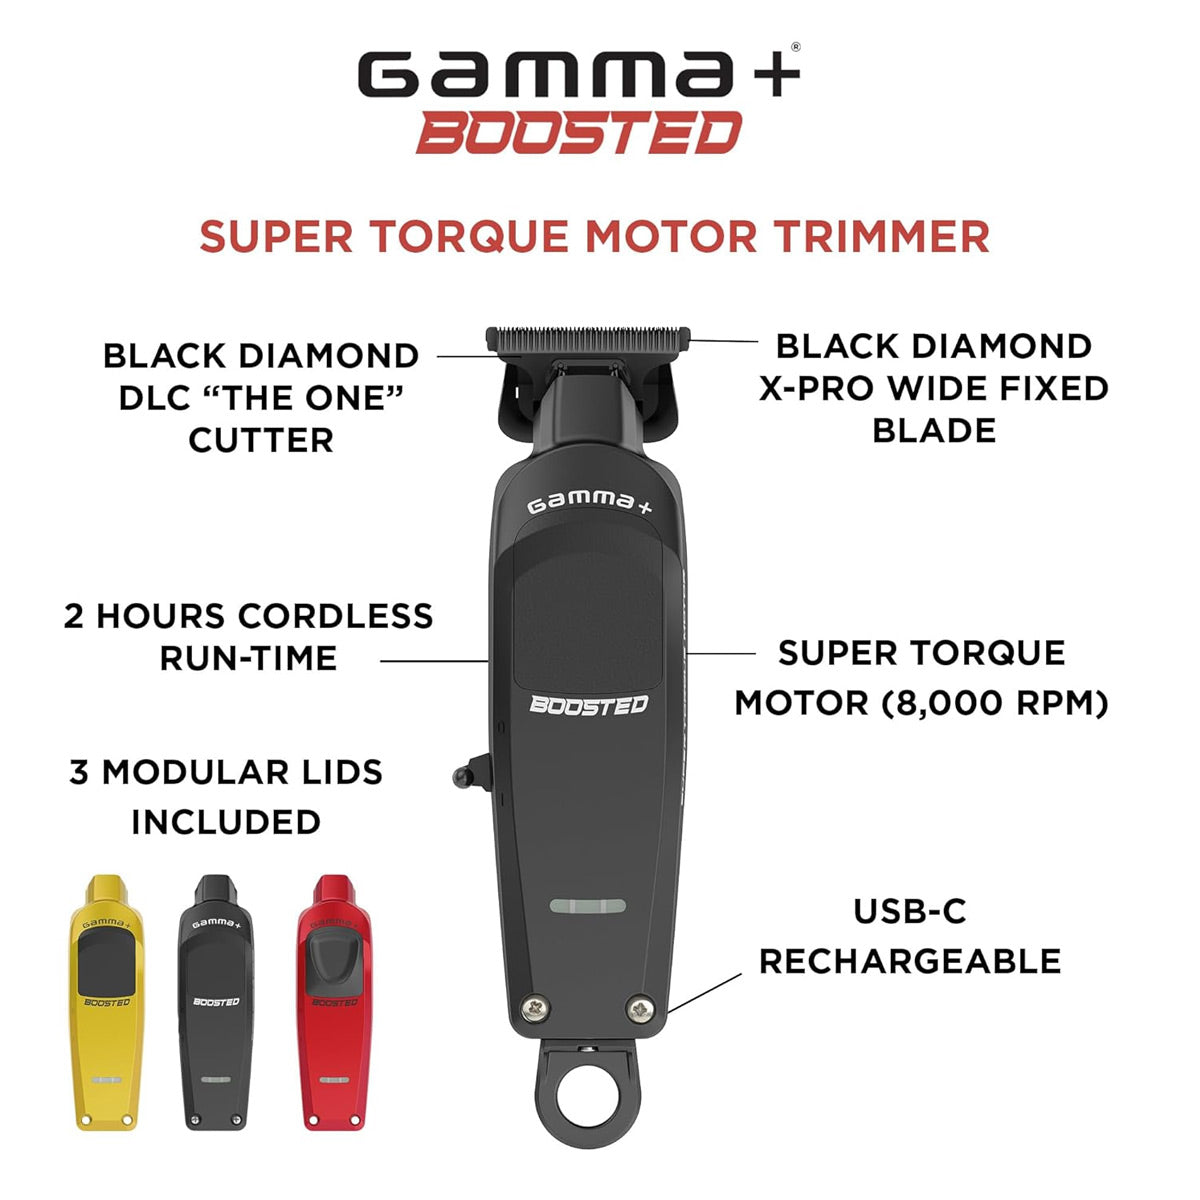 Gamma+ Boosted Professional Cordless Hair Trimmer Specs